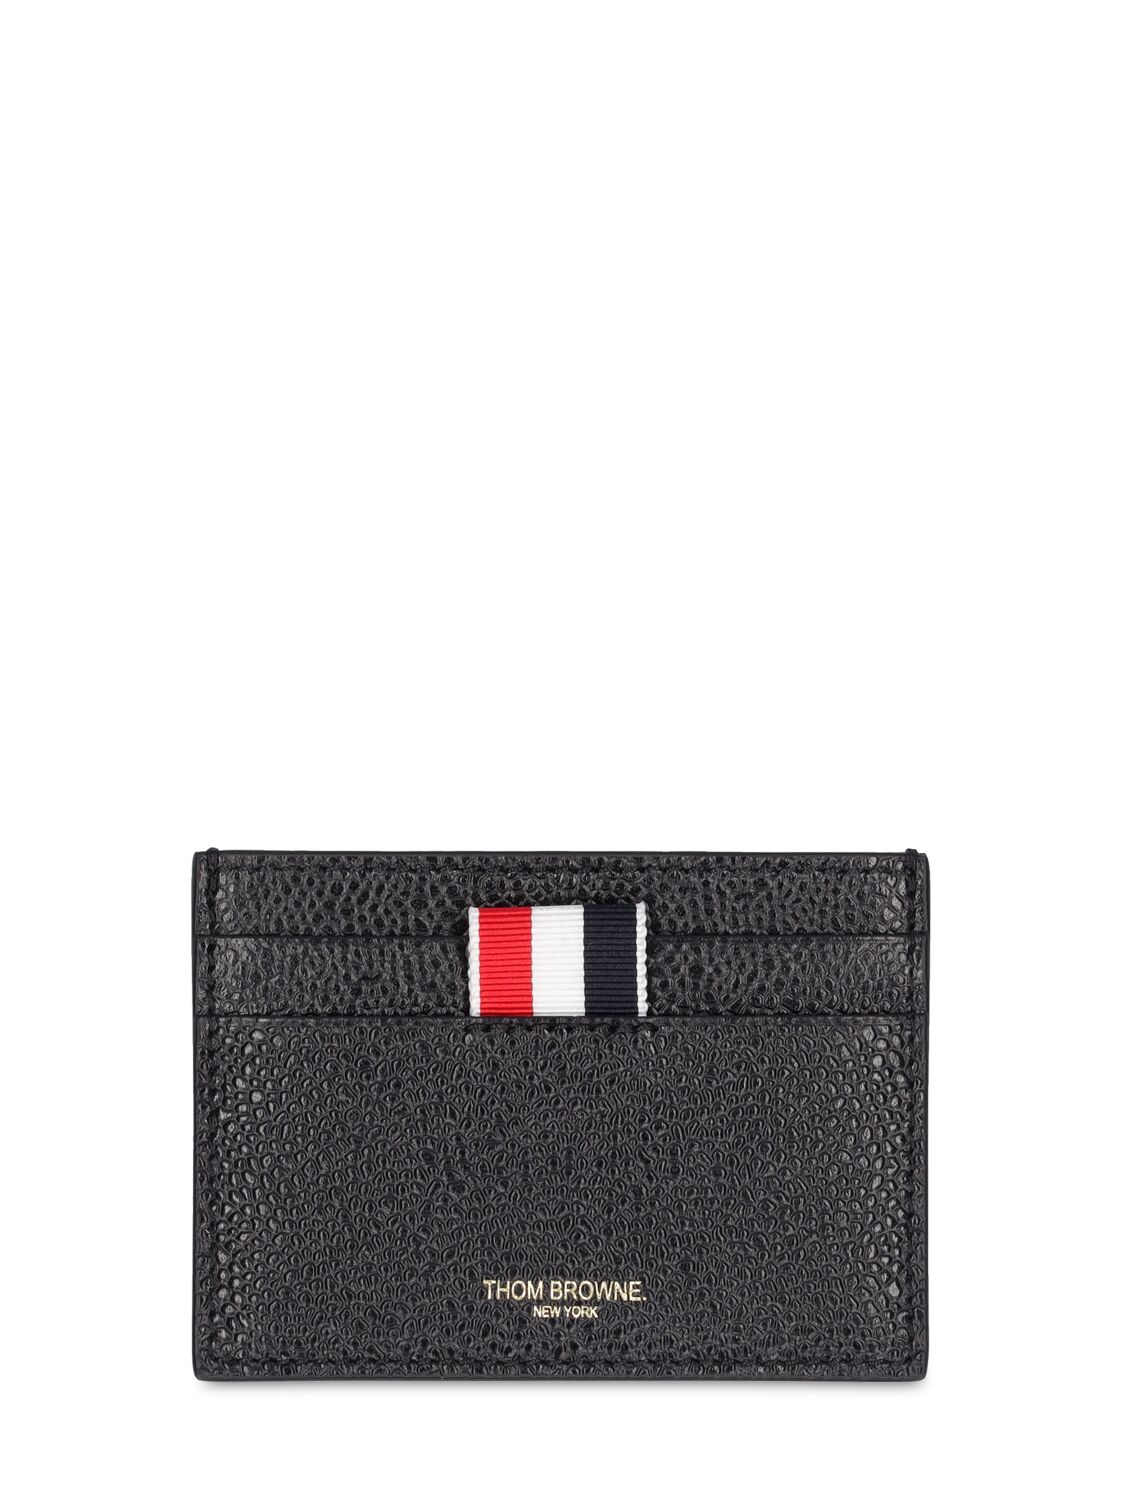 Thom Browne Single Grained Leather Card Holder In Black